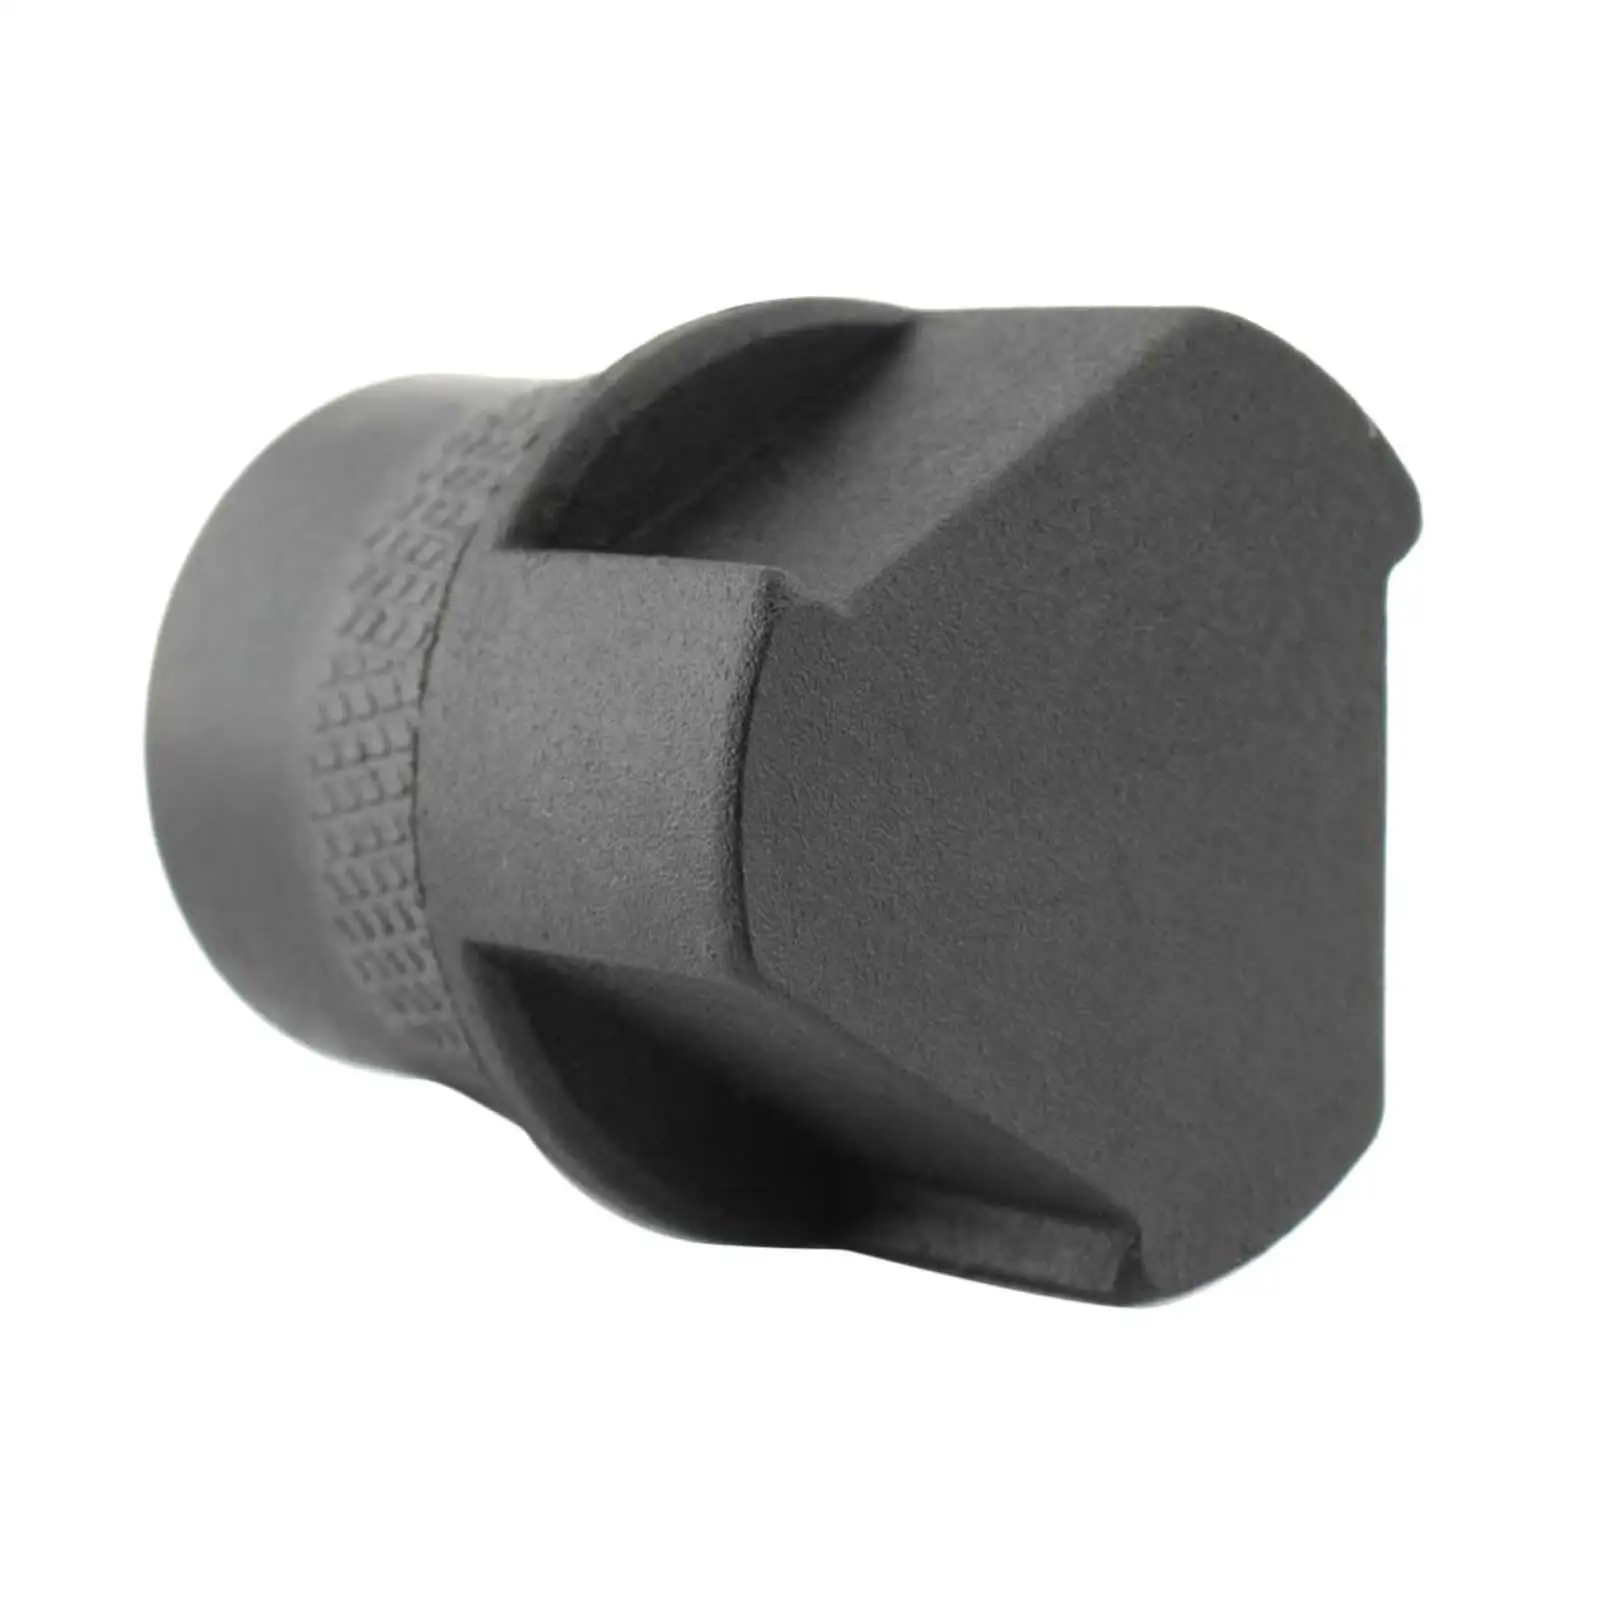 Oil Filter Wrench Cap Removal Tool for BMW /Adventure R1250RT